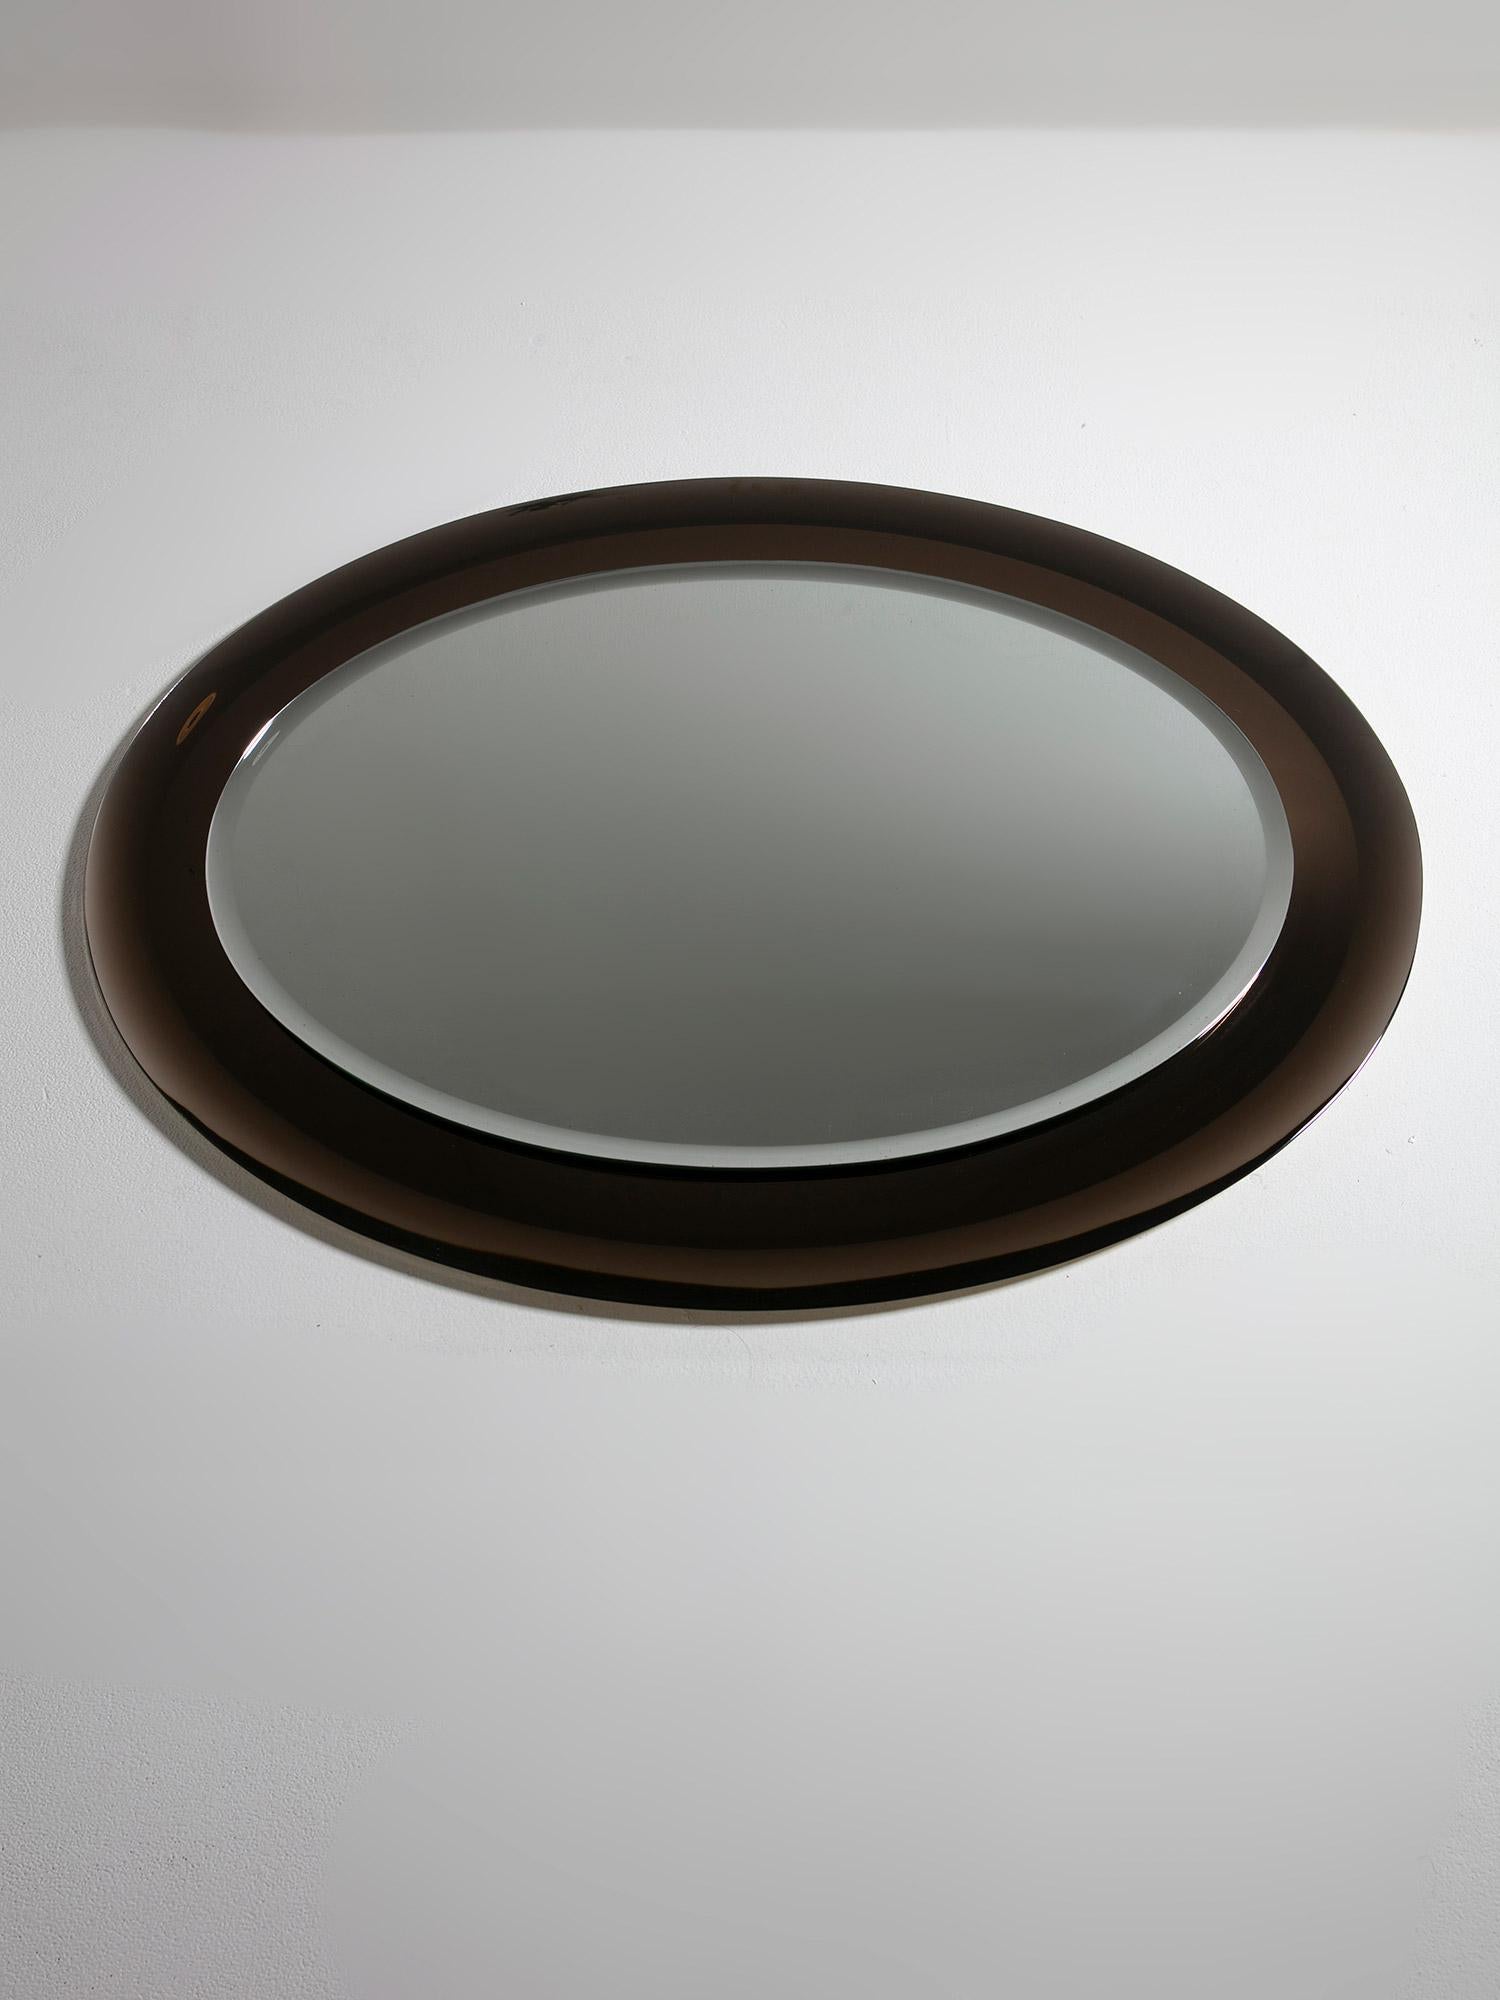 Italian Large Double Bevelled Oval Wall Mirror, Metalvetro Galvorame, Italy, 1970s For Sale